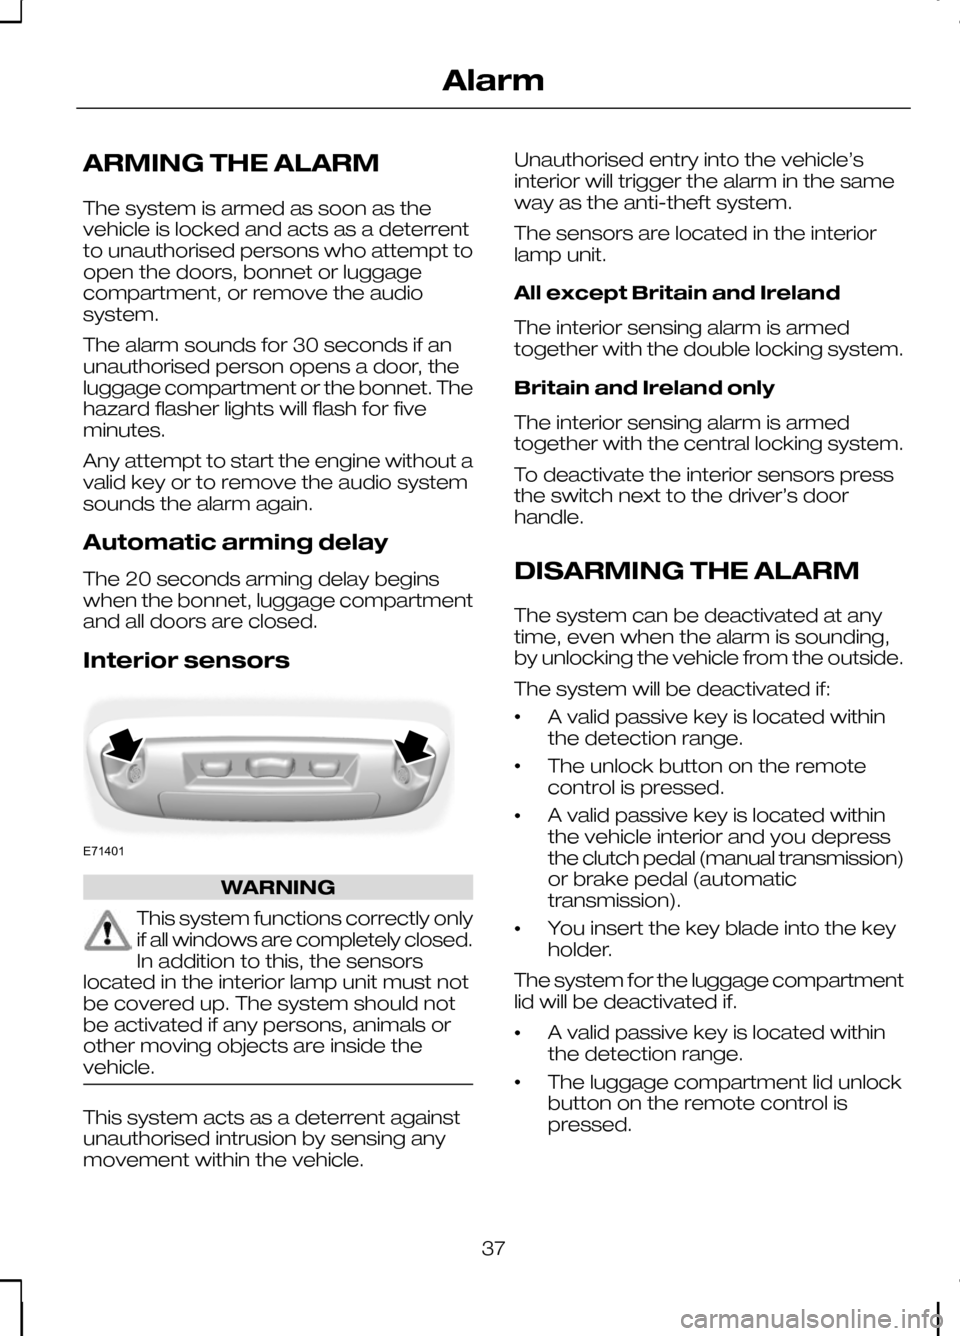 FORD KUGA 2010 1.G User Guide ARMING THE ALARM
The system is armed as soon as the
vehicle is locked and acts as a deterrent
to unauthorised persons who attempt to
open the doors, bonnet or luggage
compartment, or remove the audio
